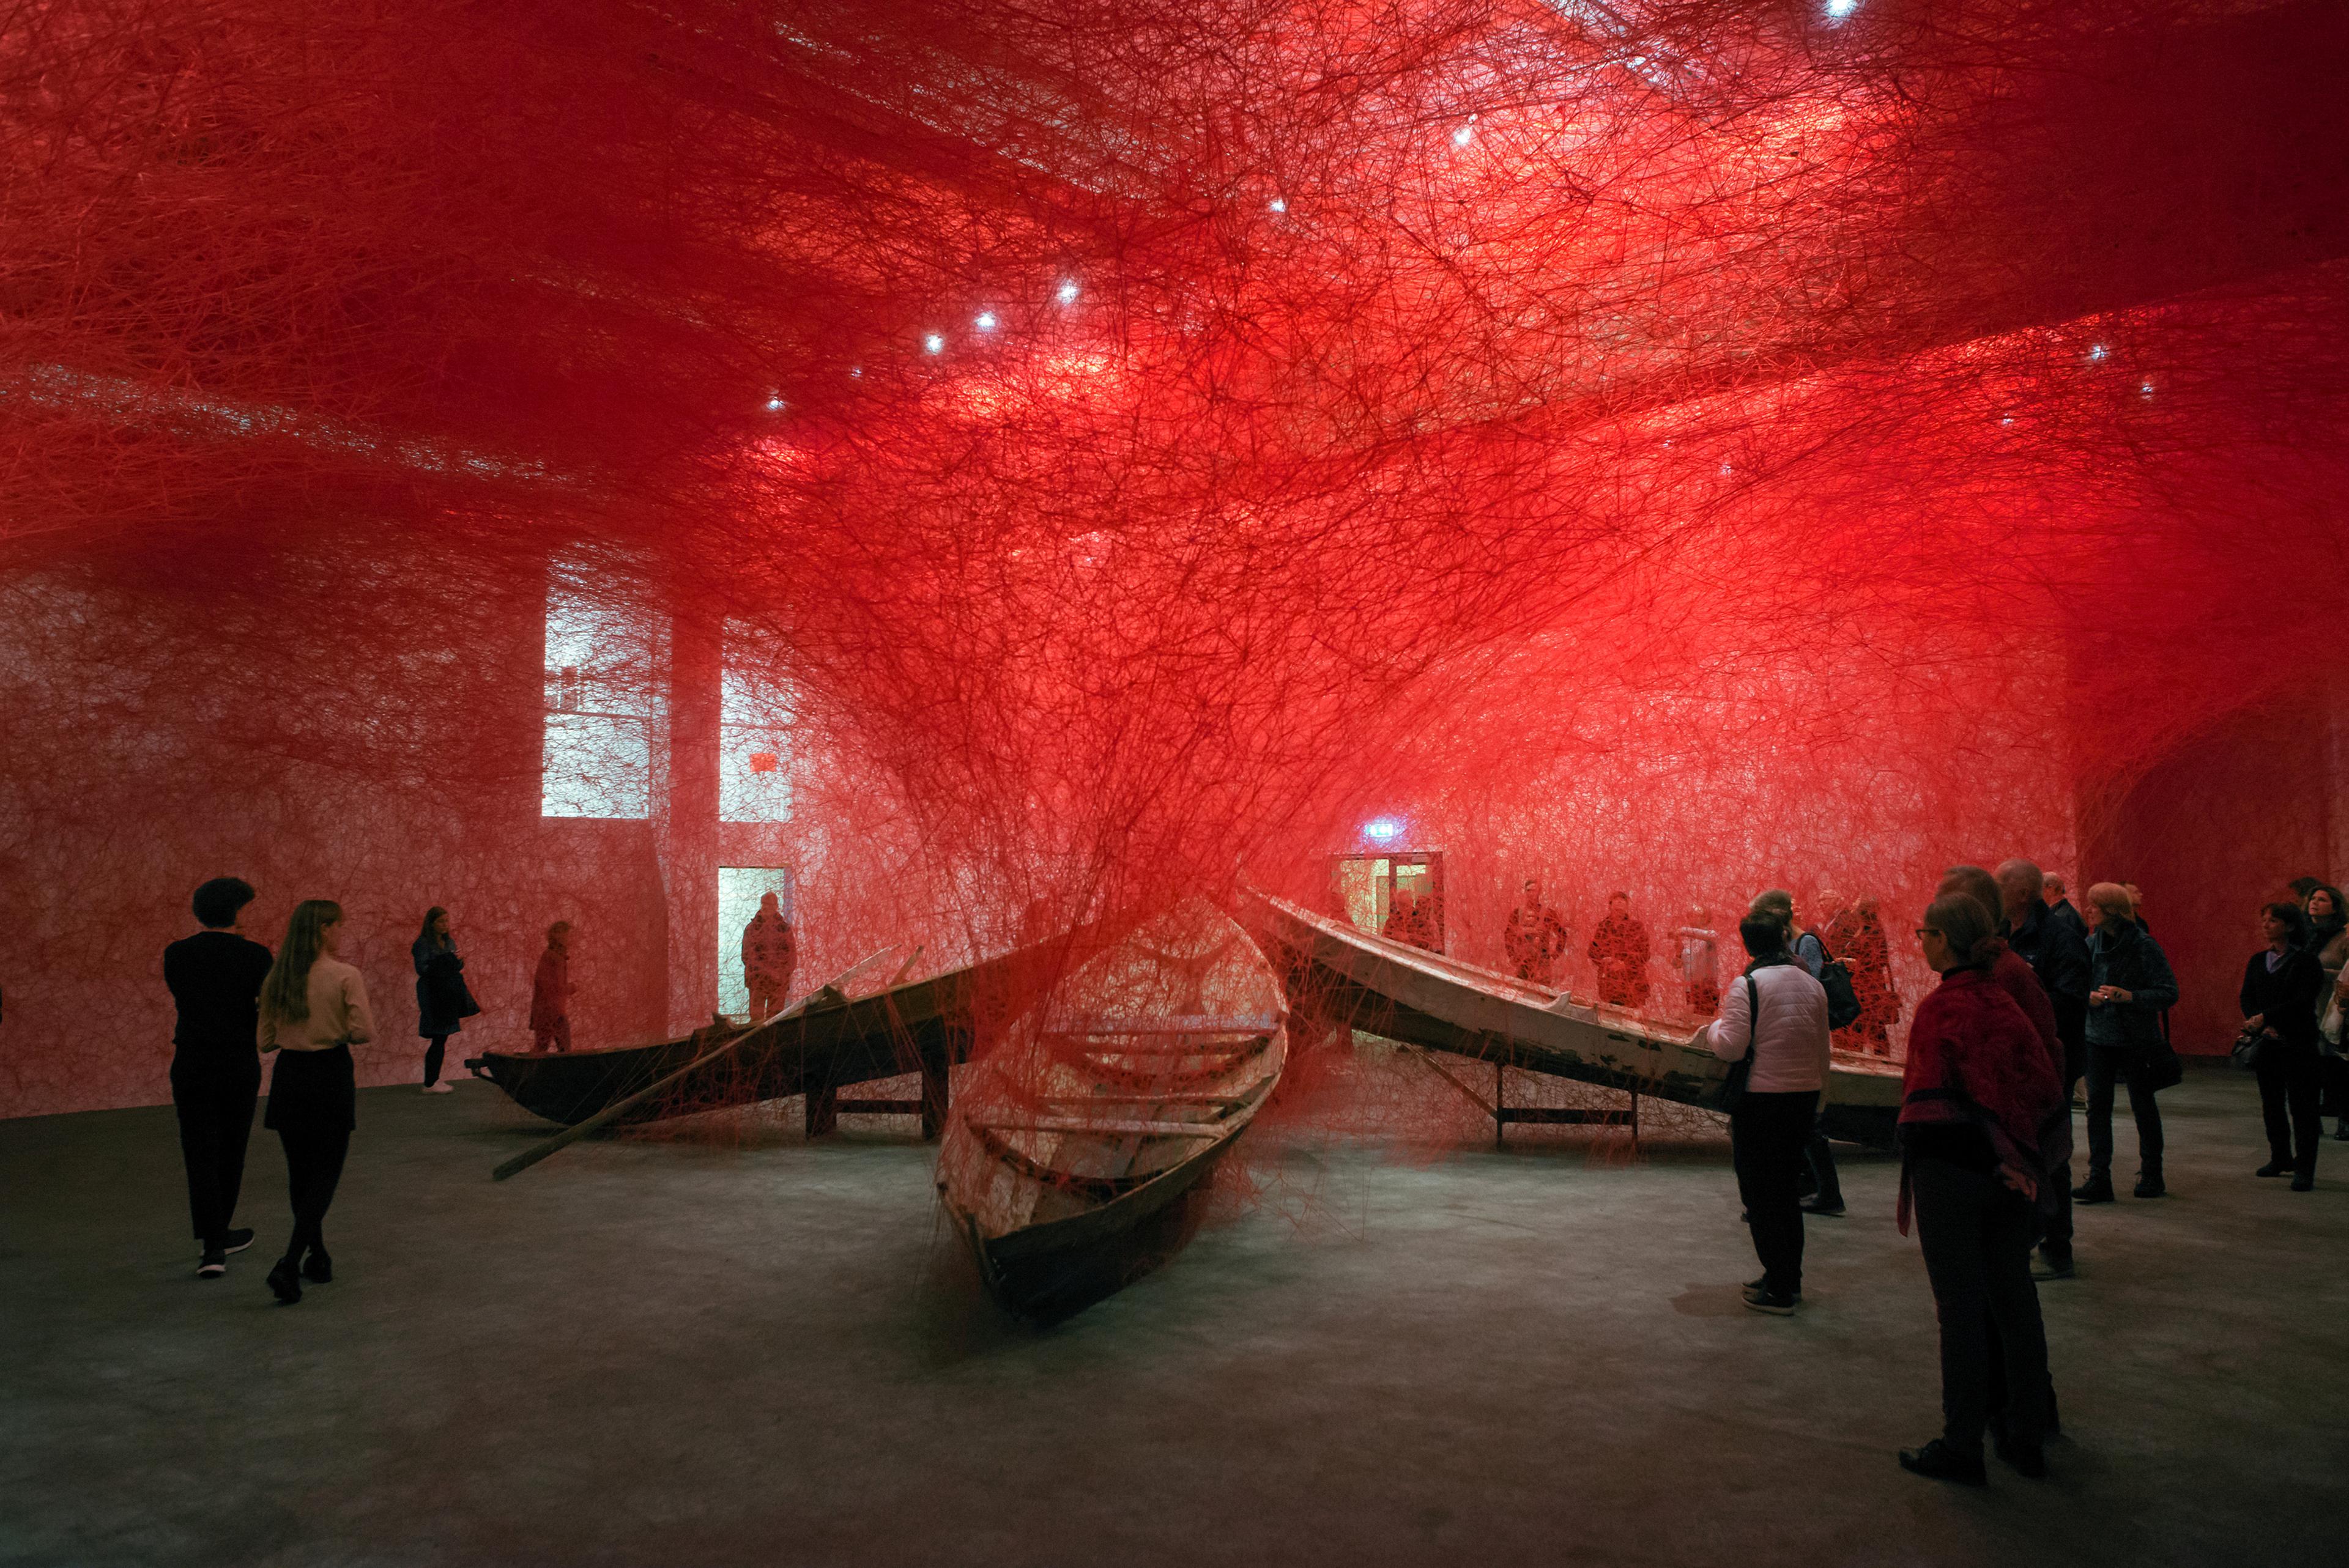 From a previous exhibition at Stenersen, with a large installation with three wooden boats enmeshed in red threads